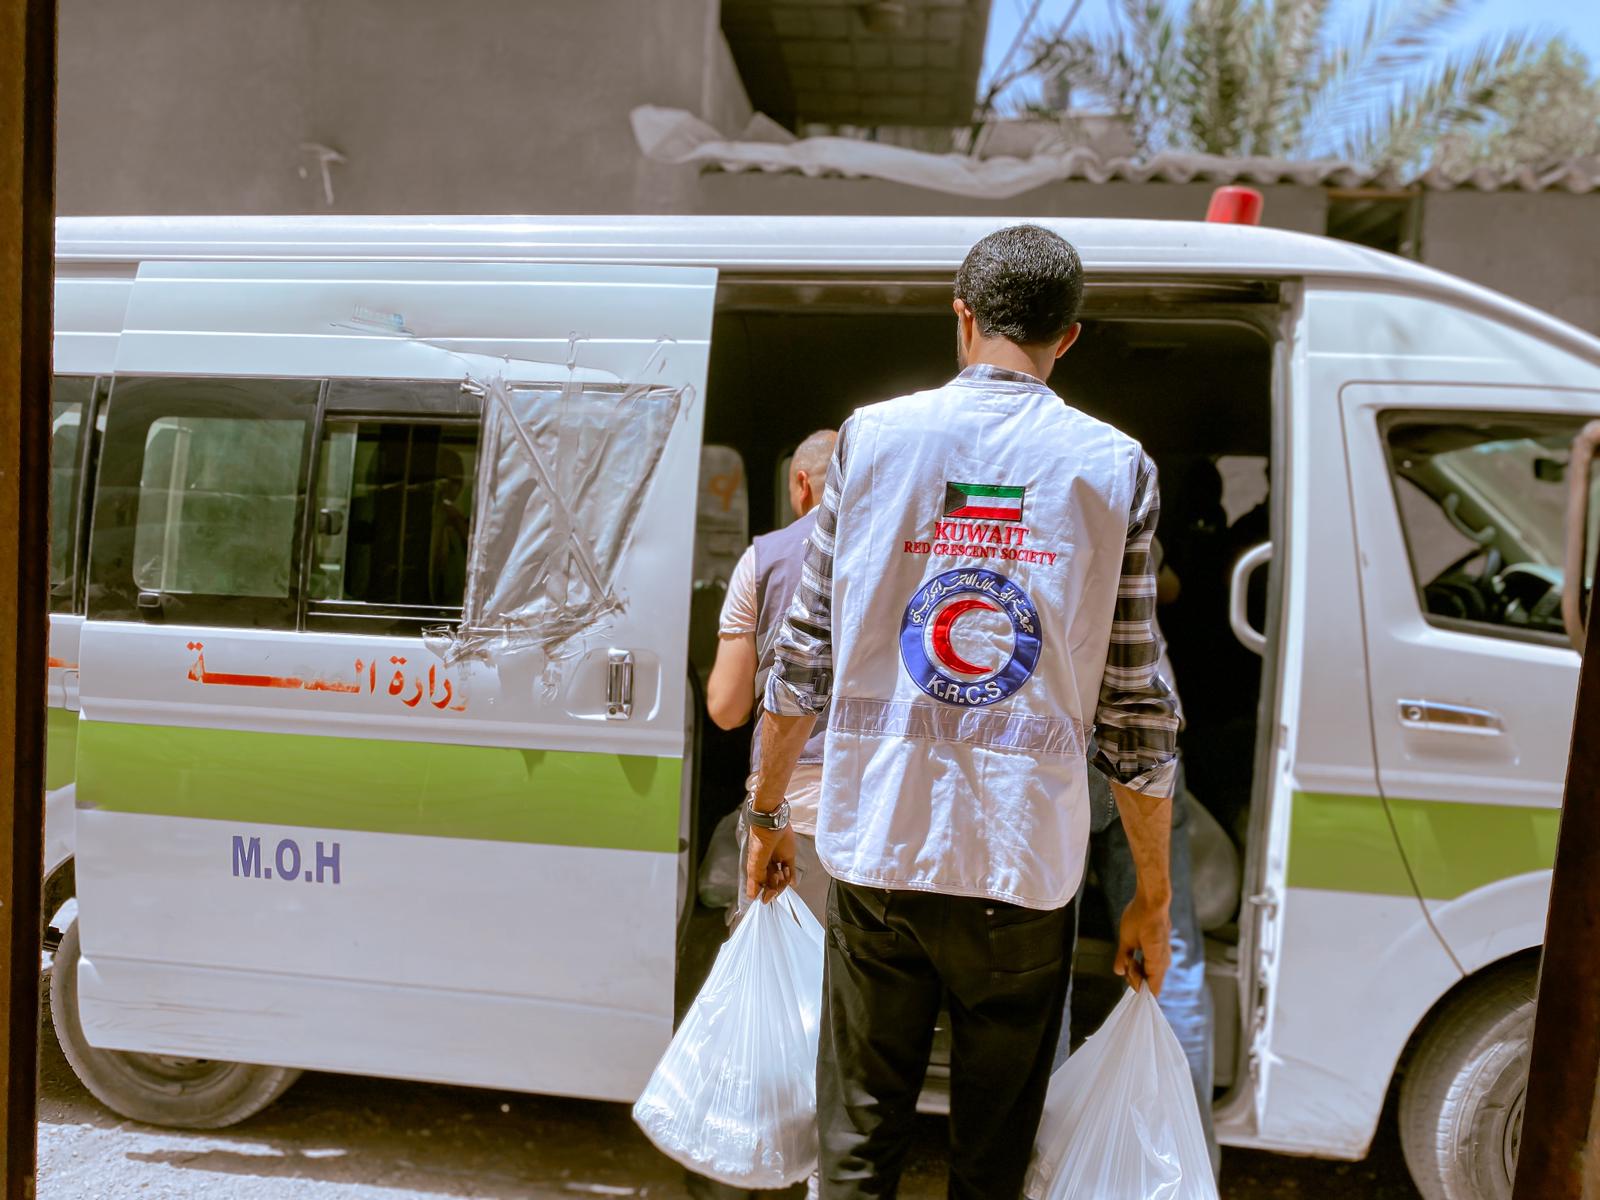 Kuwait red crescent society provides 75,000 meals to health sector in Gaza